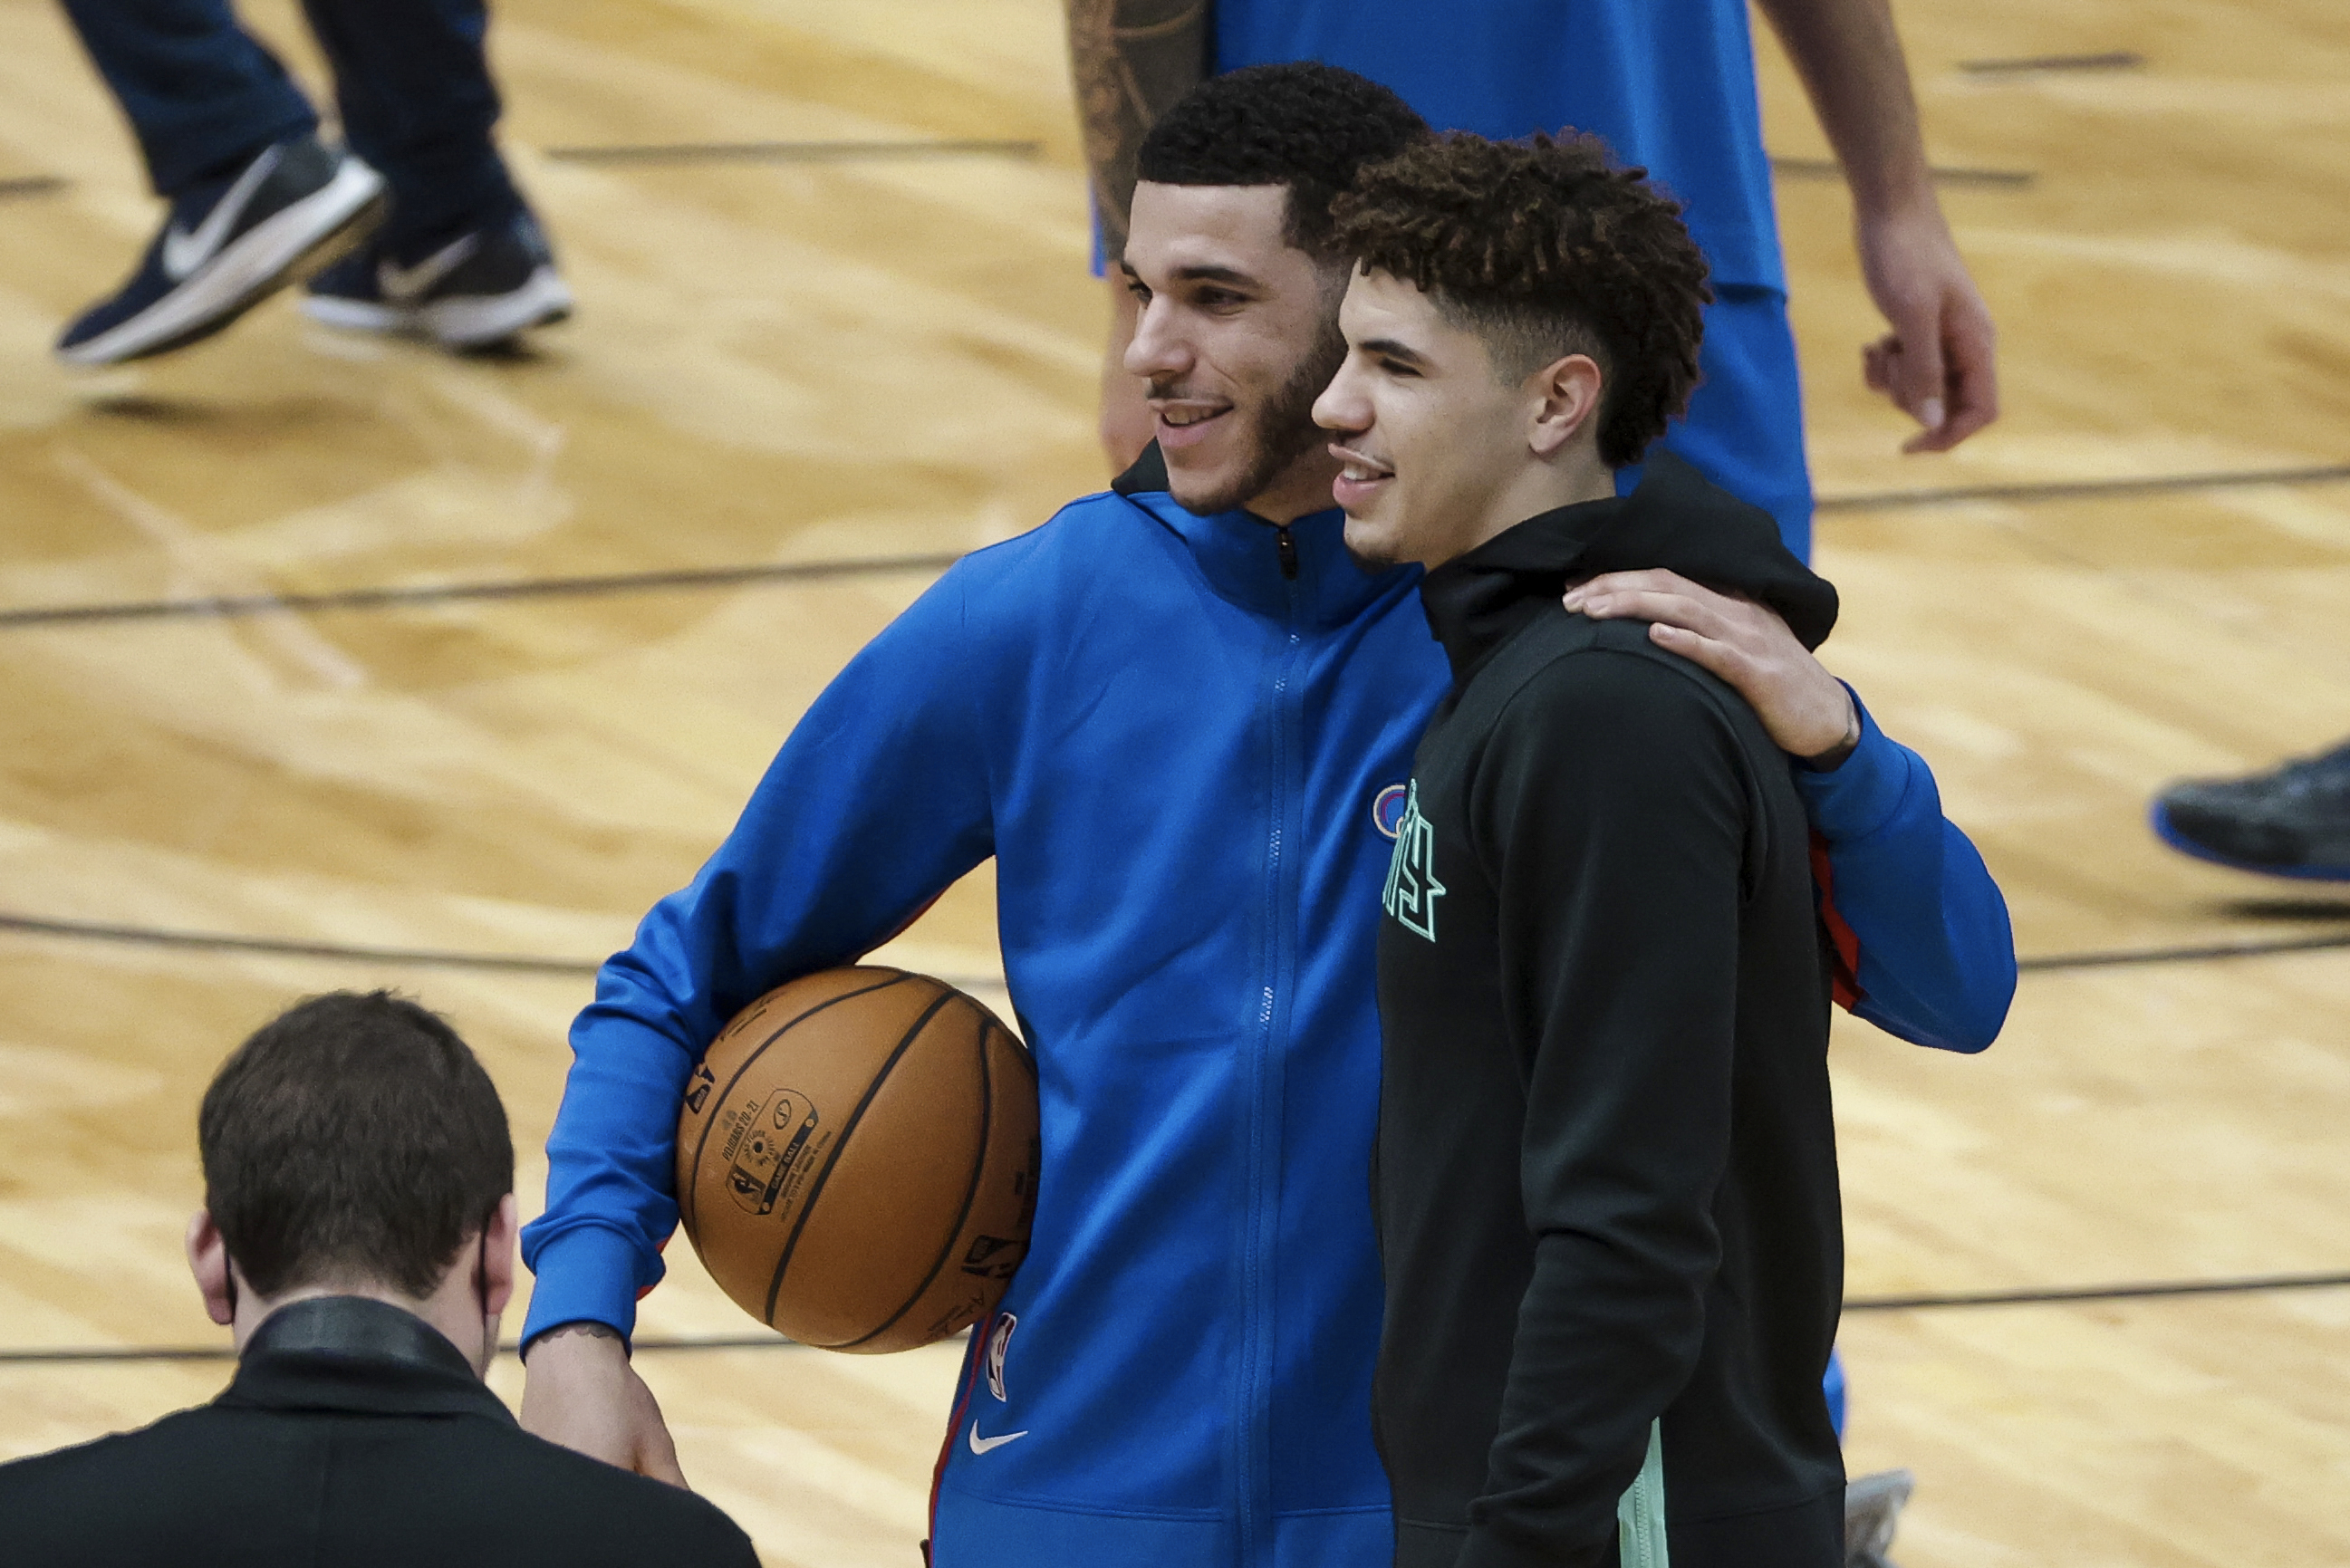 Ball brothers battle as Lonzo gets upper hand over LaMelo